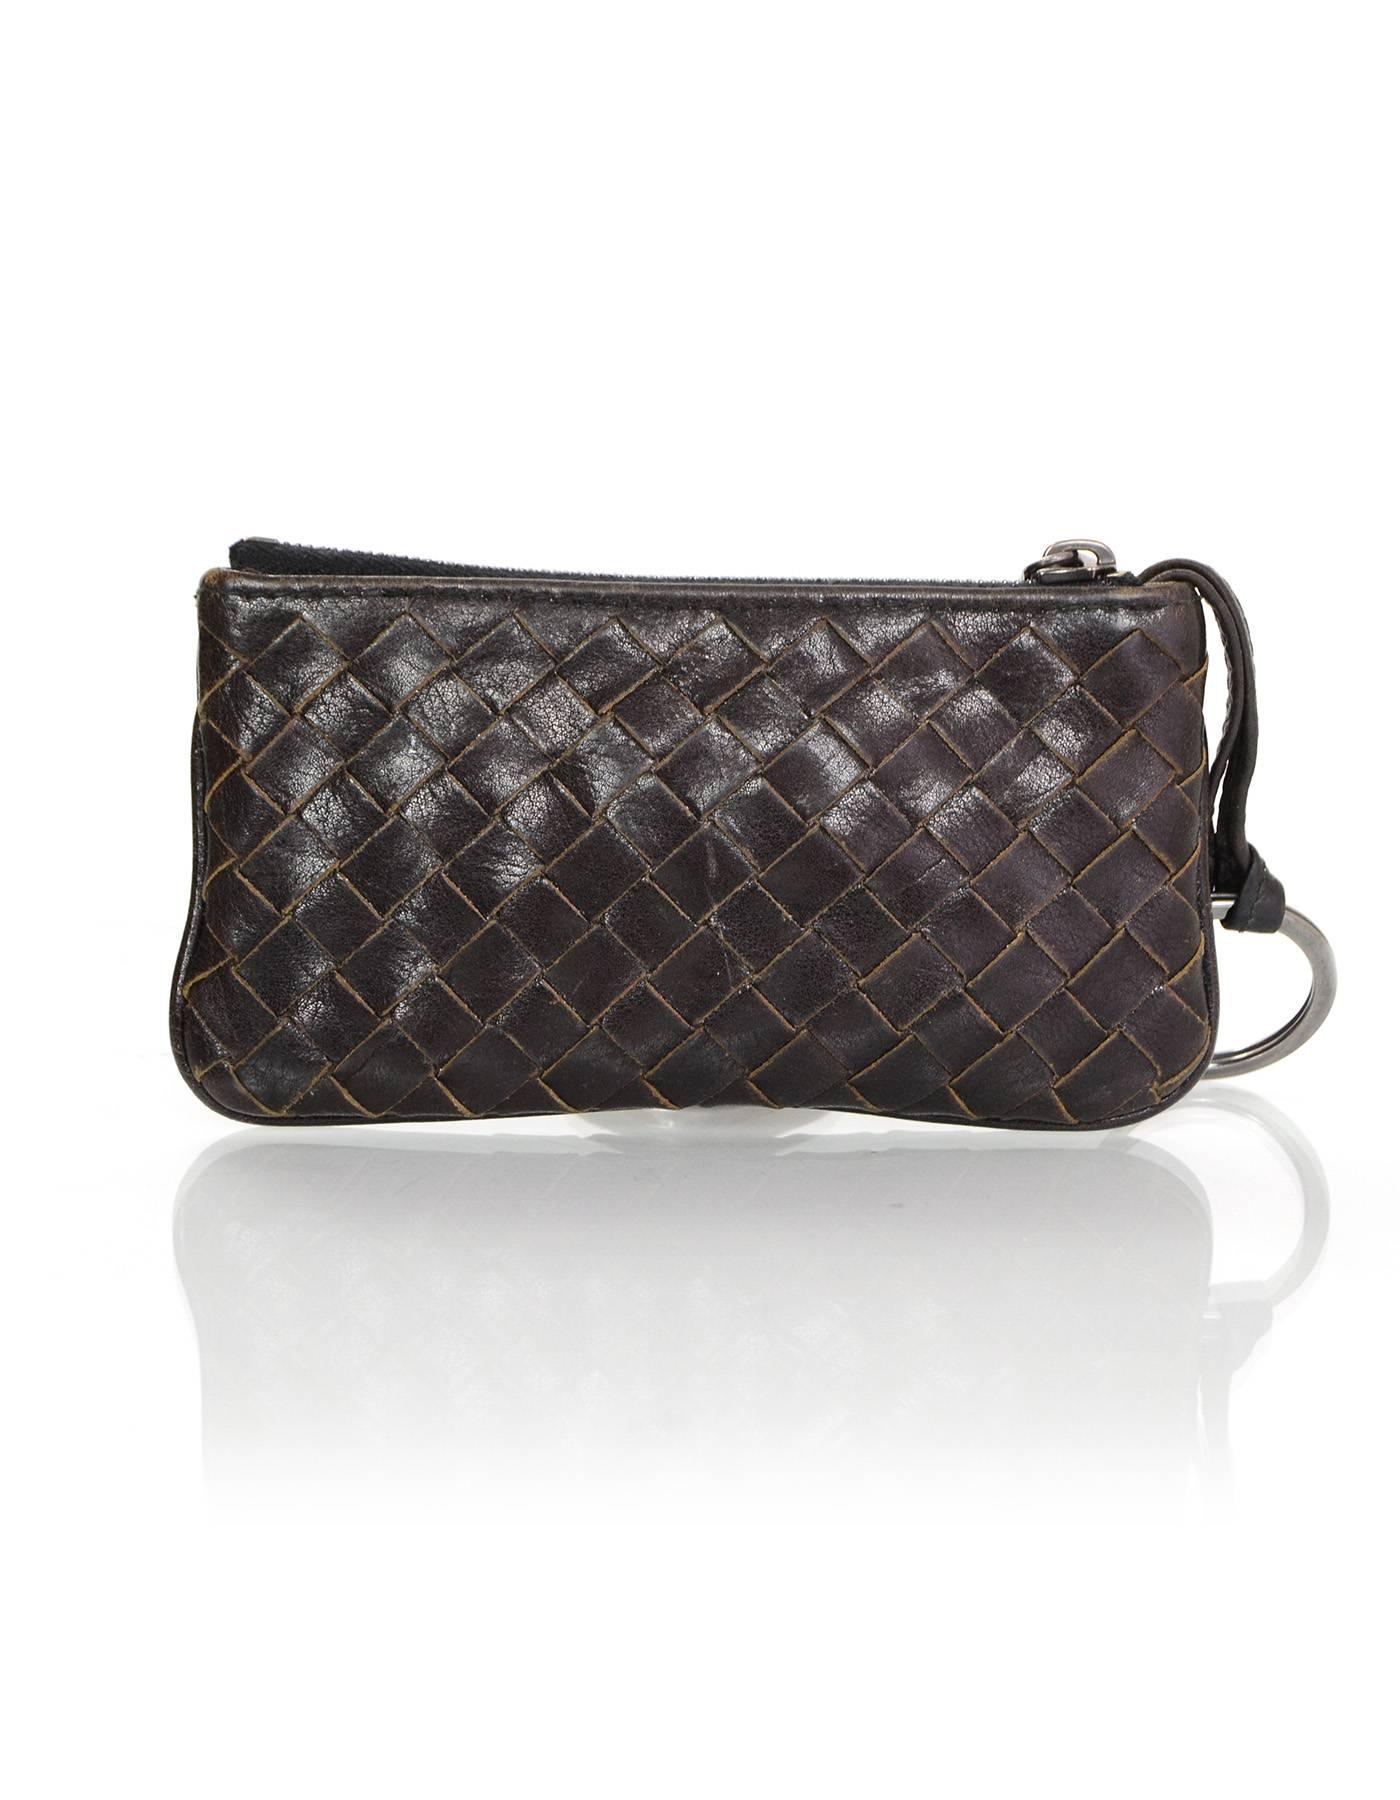 Bottega Veneta Brown Intrecciato Woven Leather Card Case/Key Holder
Features key ring that extends from inside of case

Made In: Italy
Year of Production: 2011
Color: Brown
Hardware: Bronze
Materials: Leather
Lining: Brown canvas
Closure/Opening: